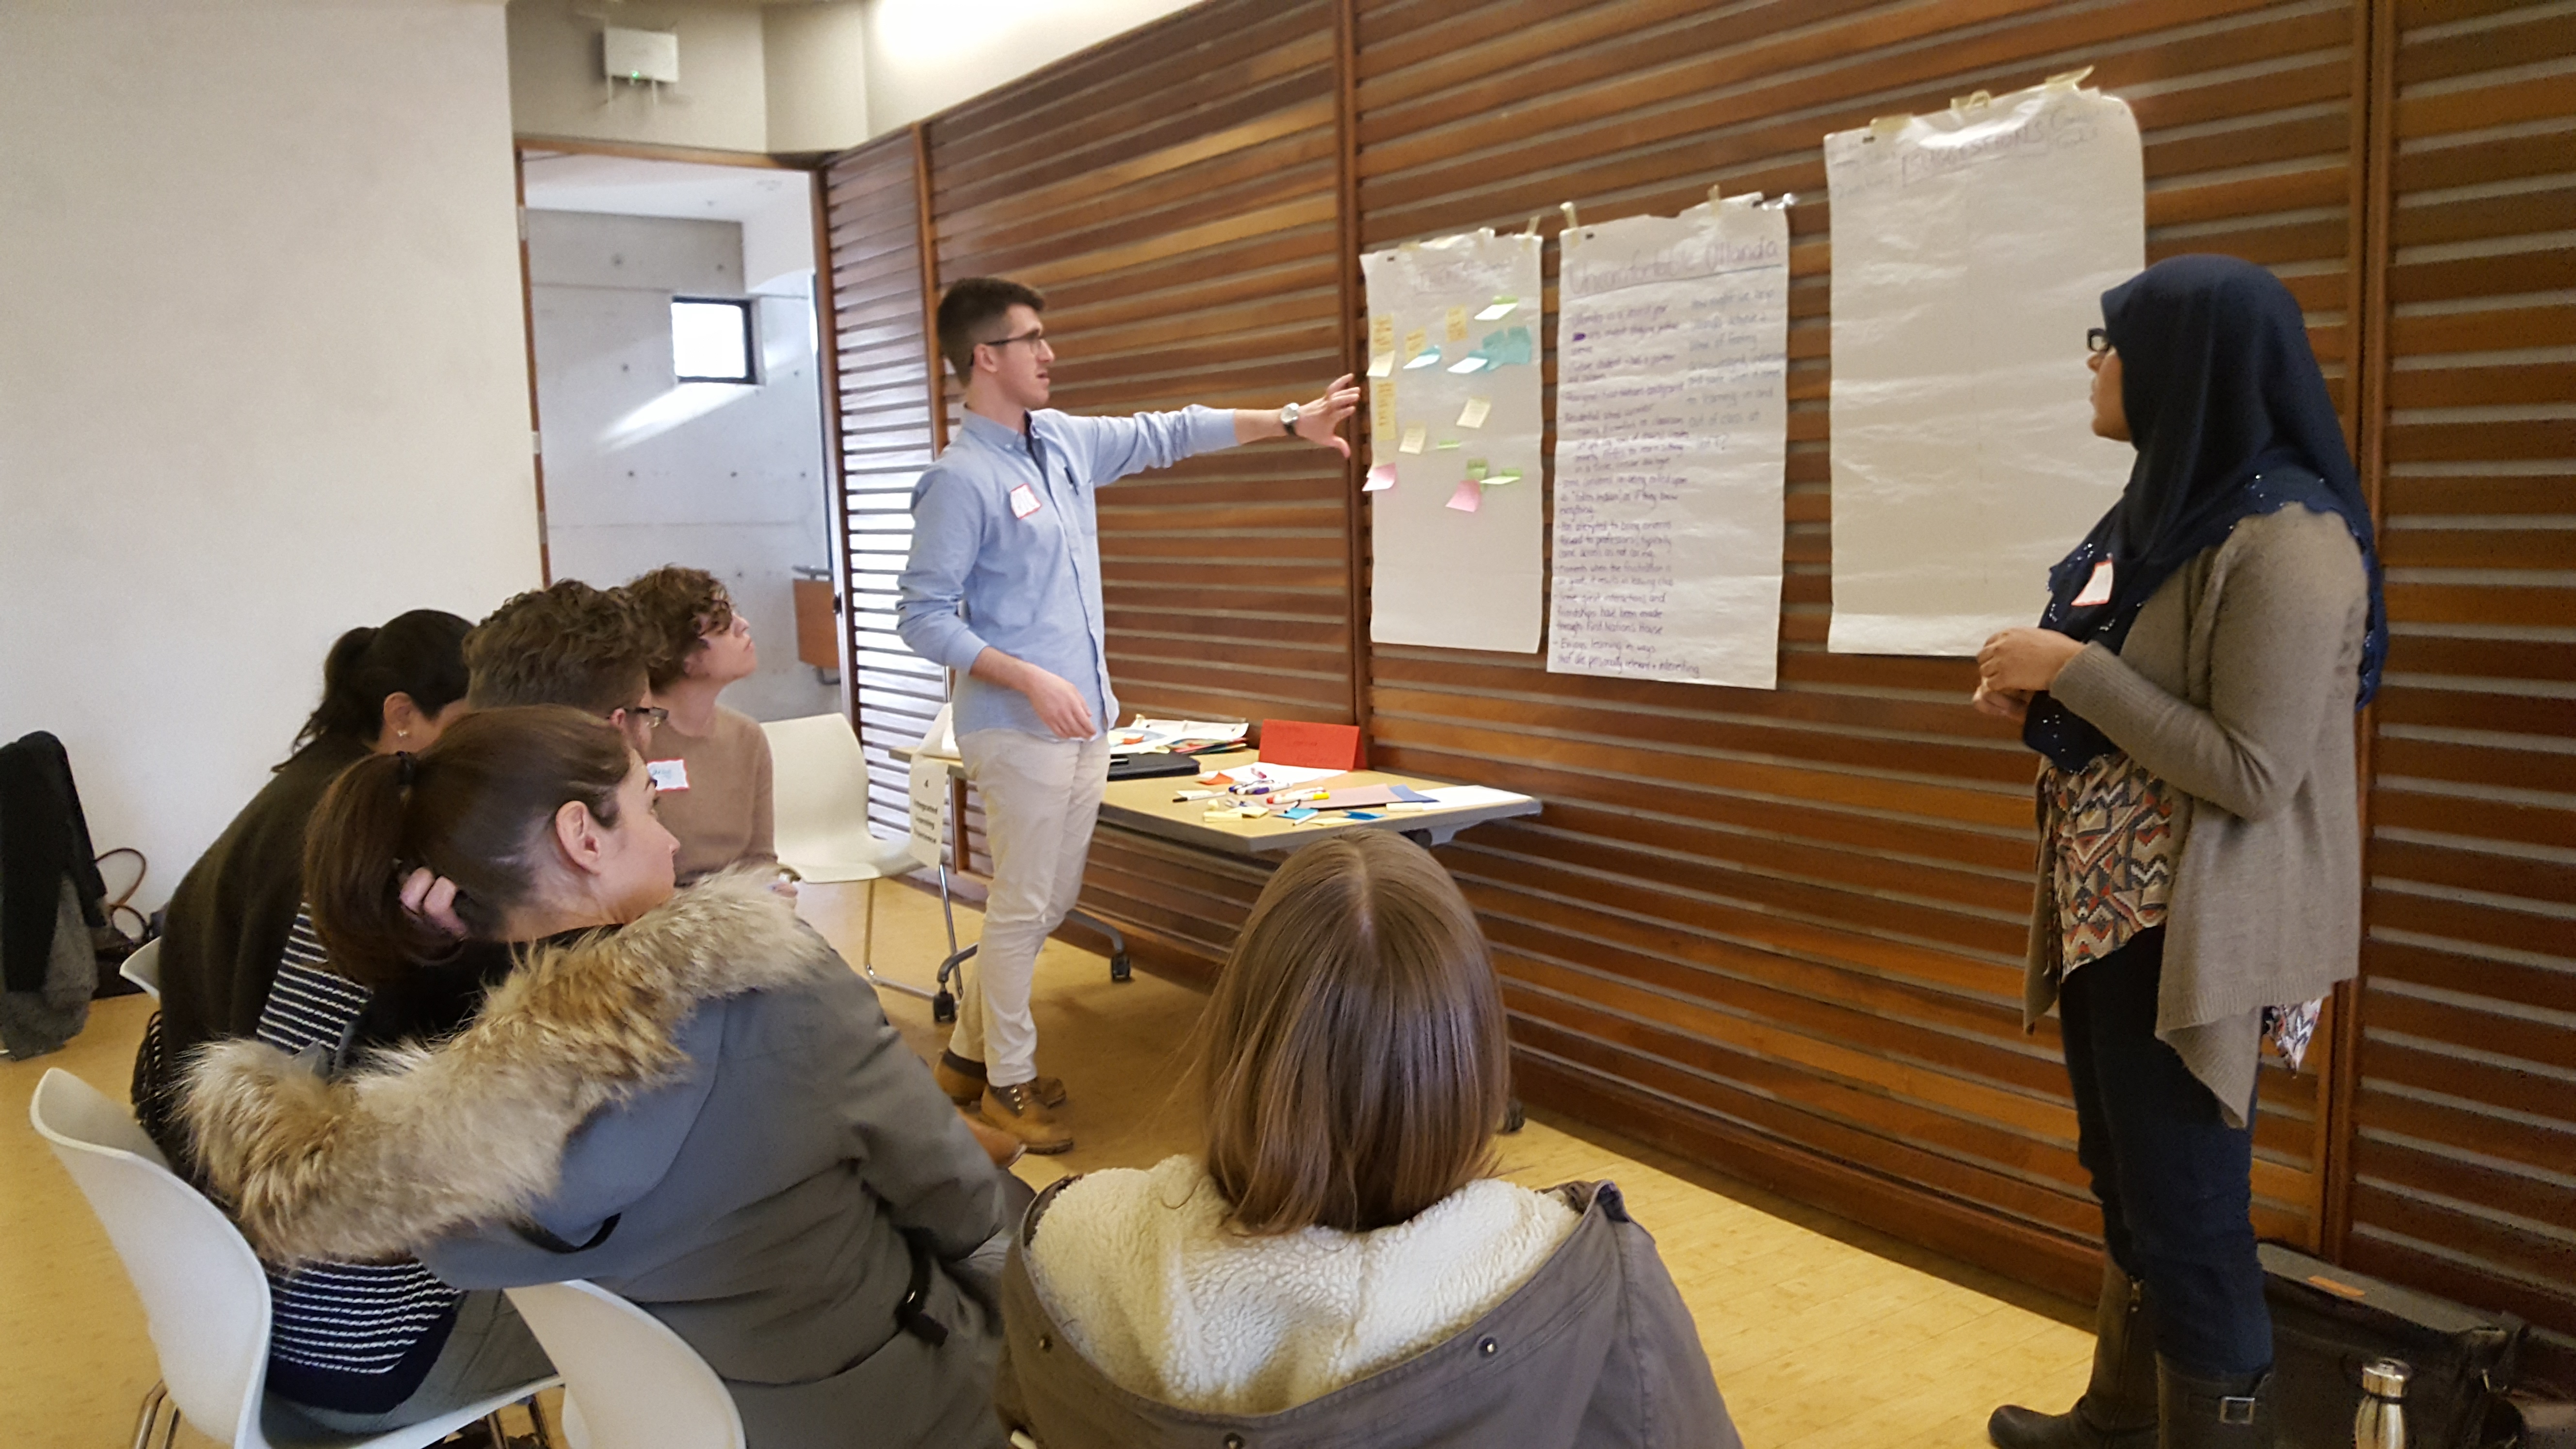 Individuals surround paper posted to a wall, discussing ideas and writing down concepts.